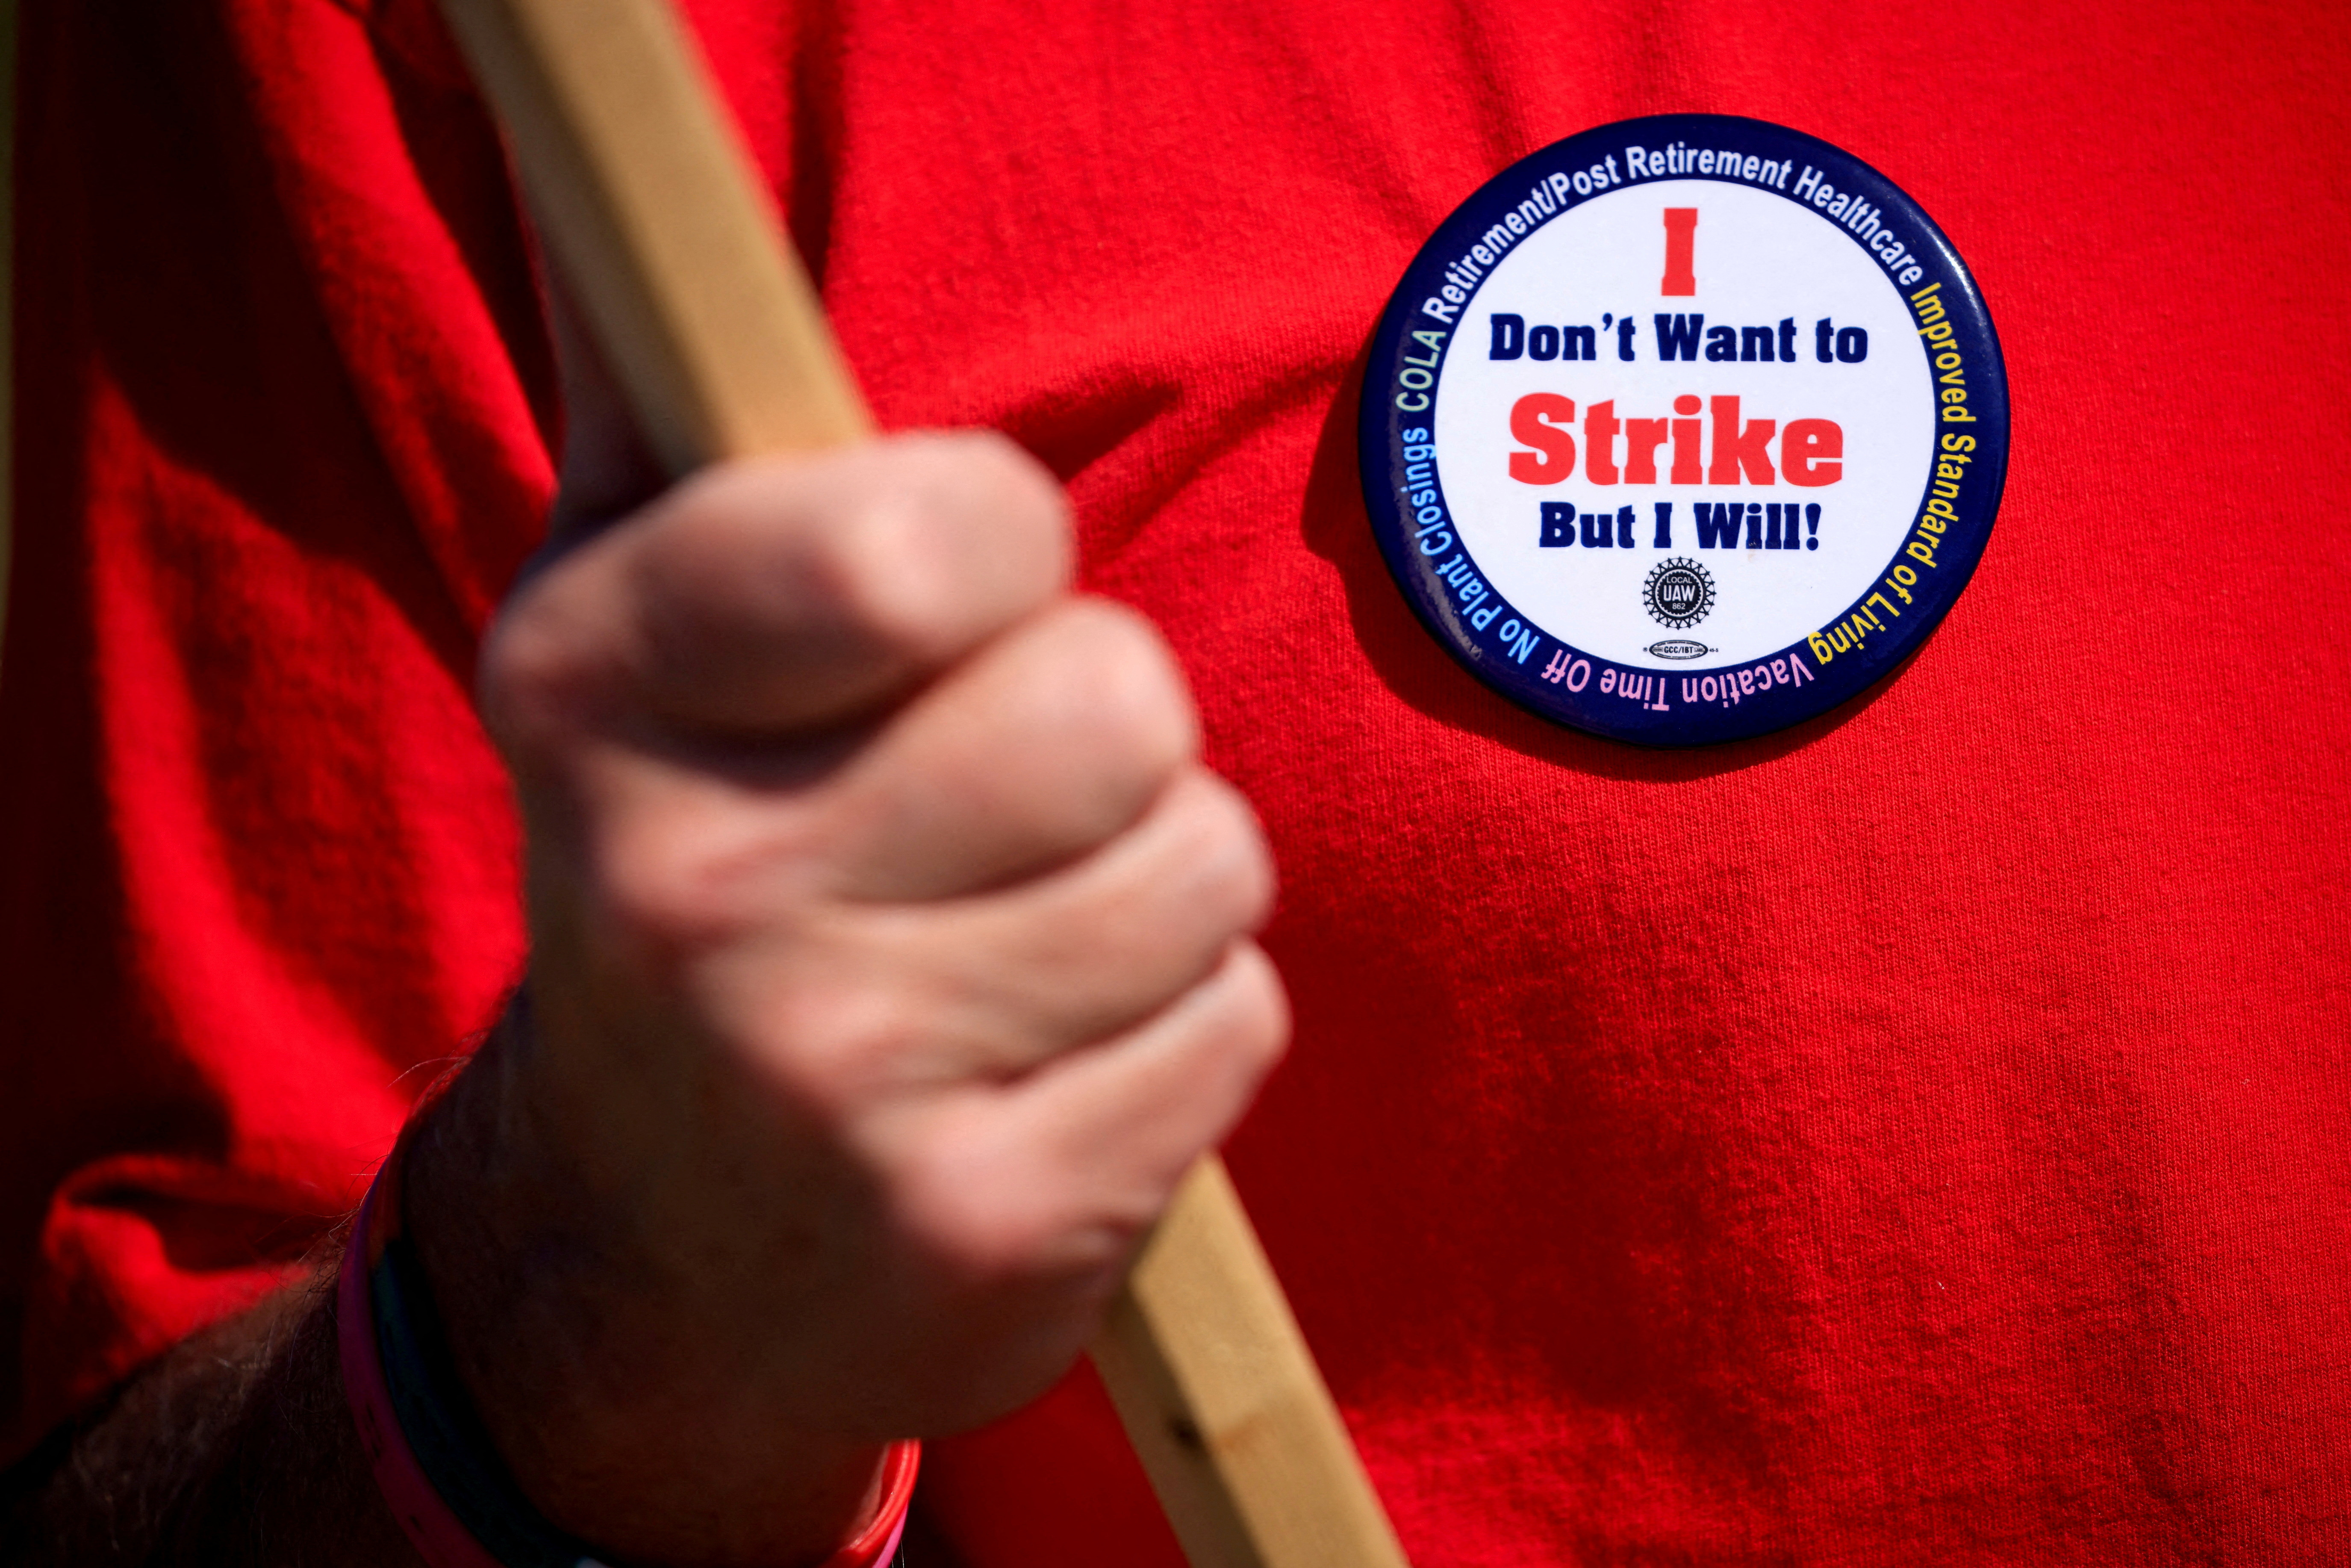 United Auto Workers (UAW) union members picket outside Ford's Kentucky truck plant